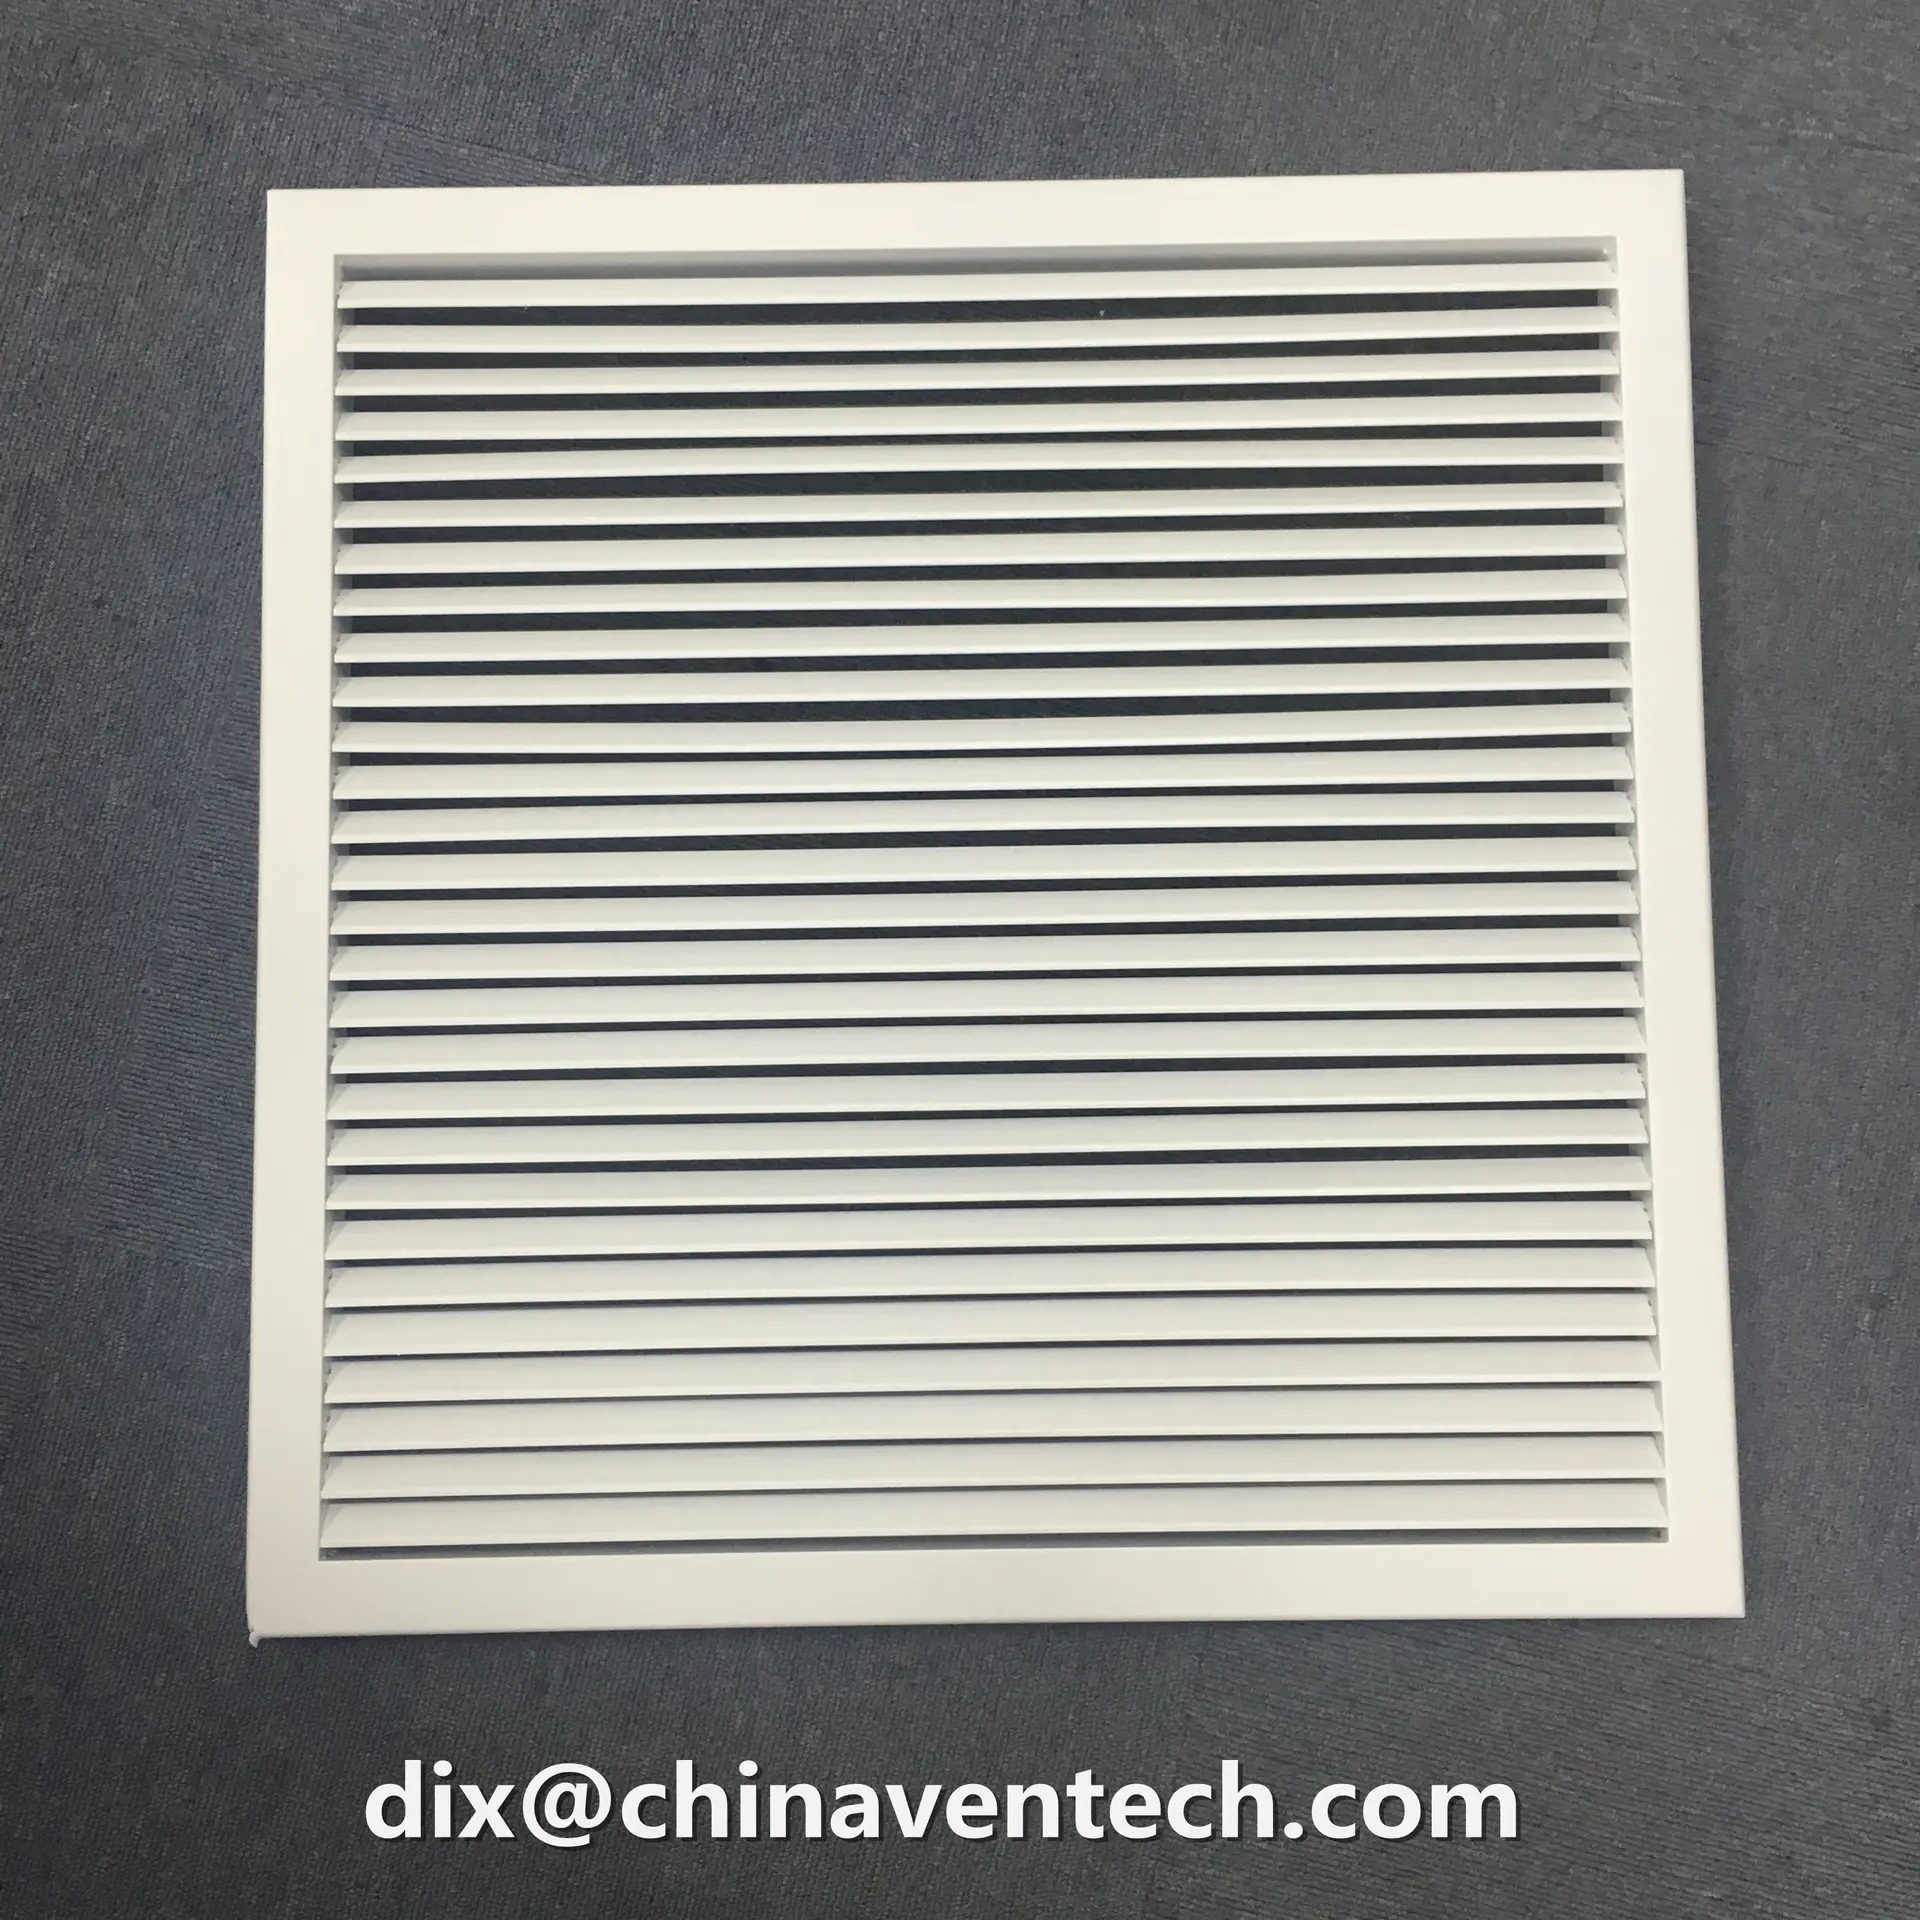 Hvac air conditioning duct insulation vent cover exhaust grille diffuser